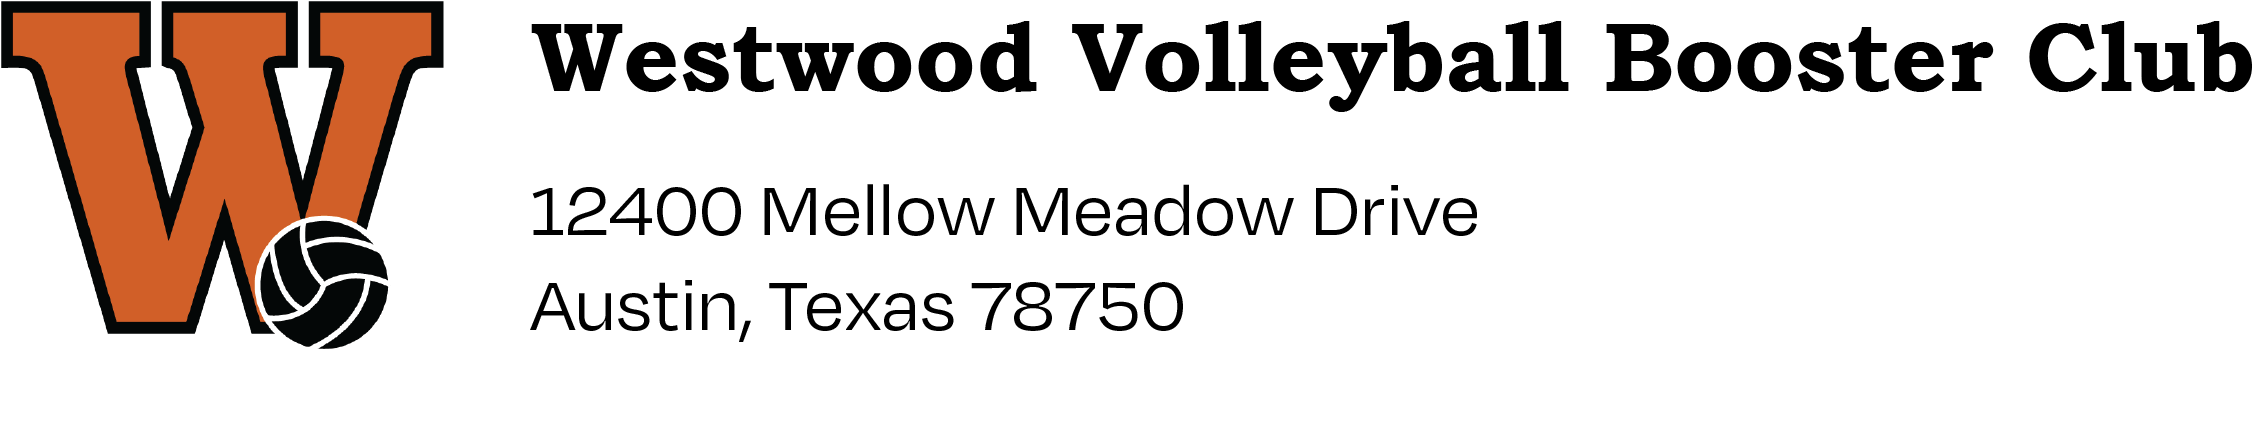 Westwood Volleyball Boosters